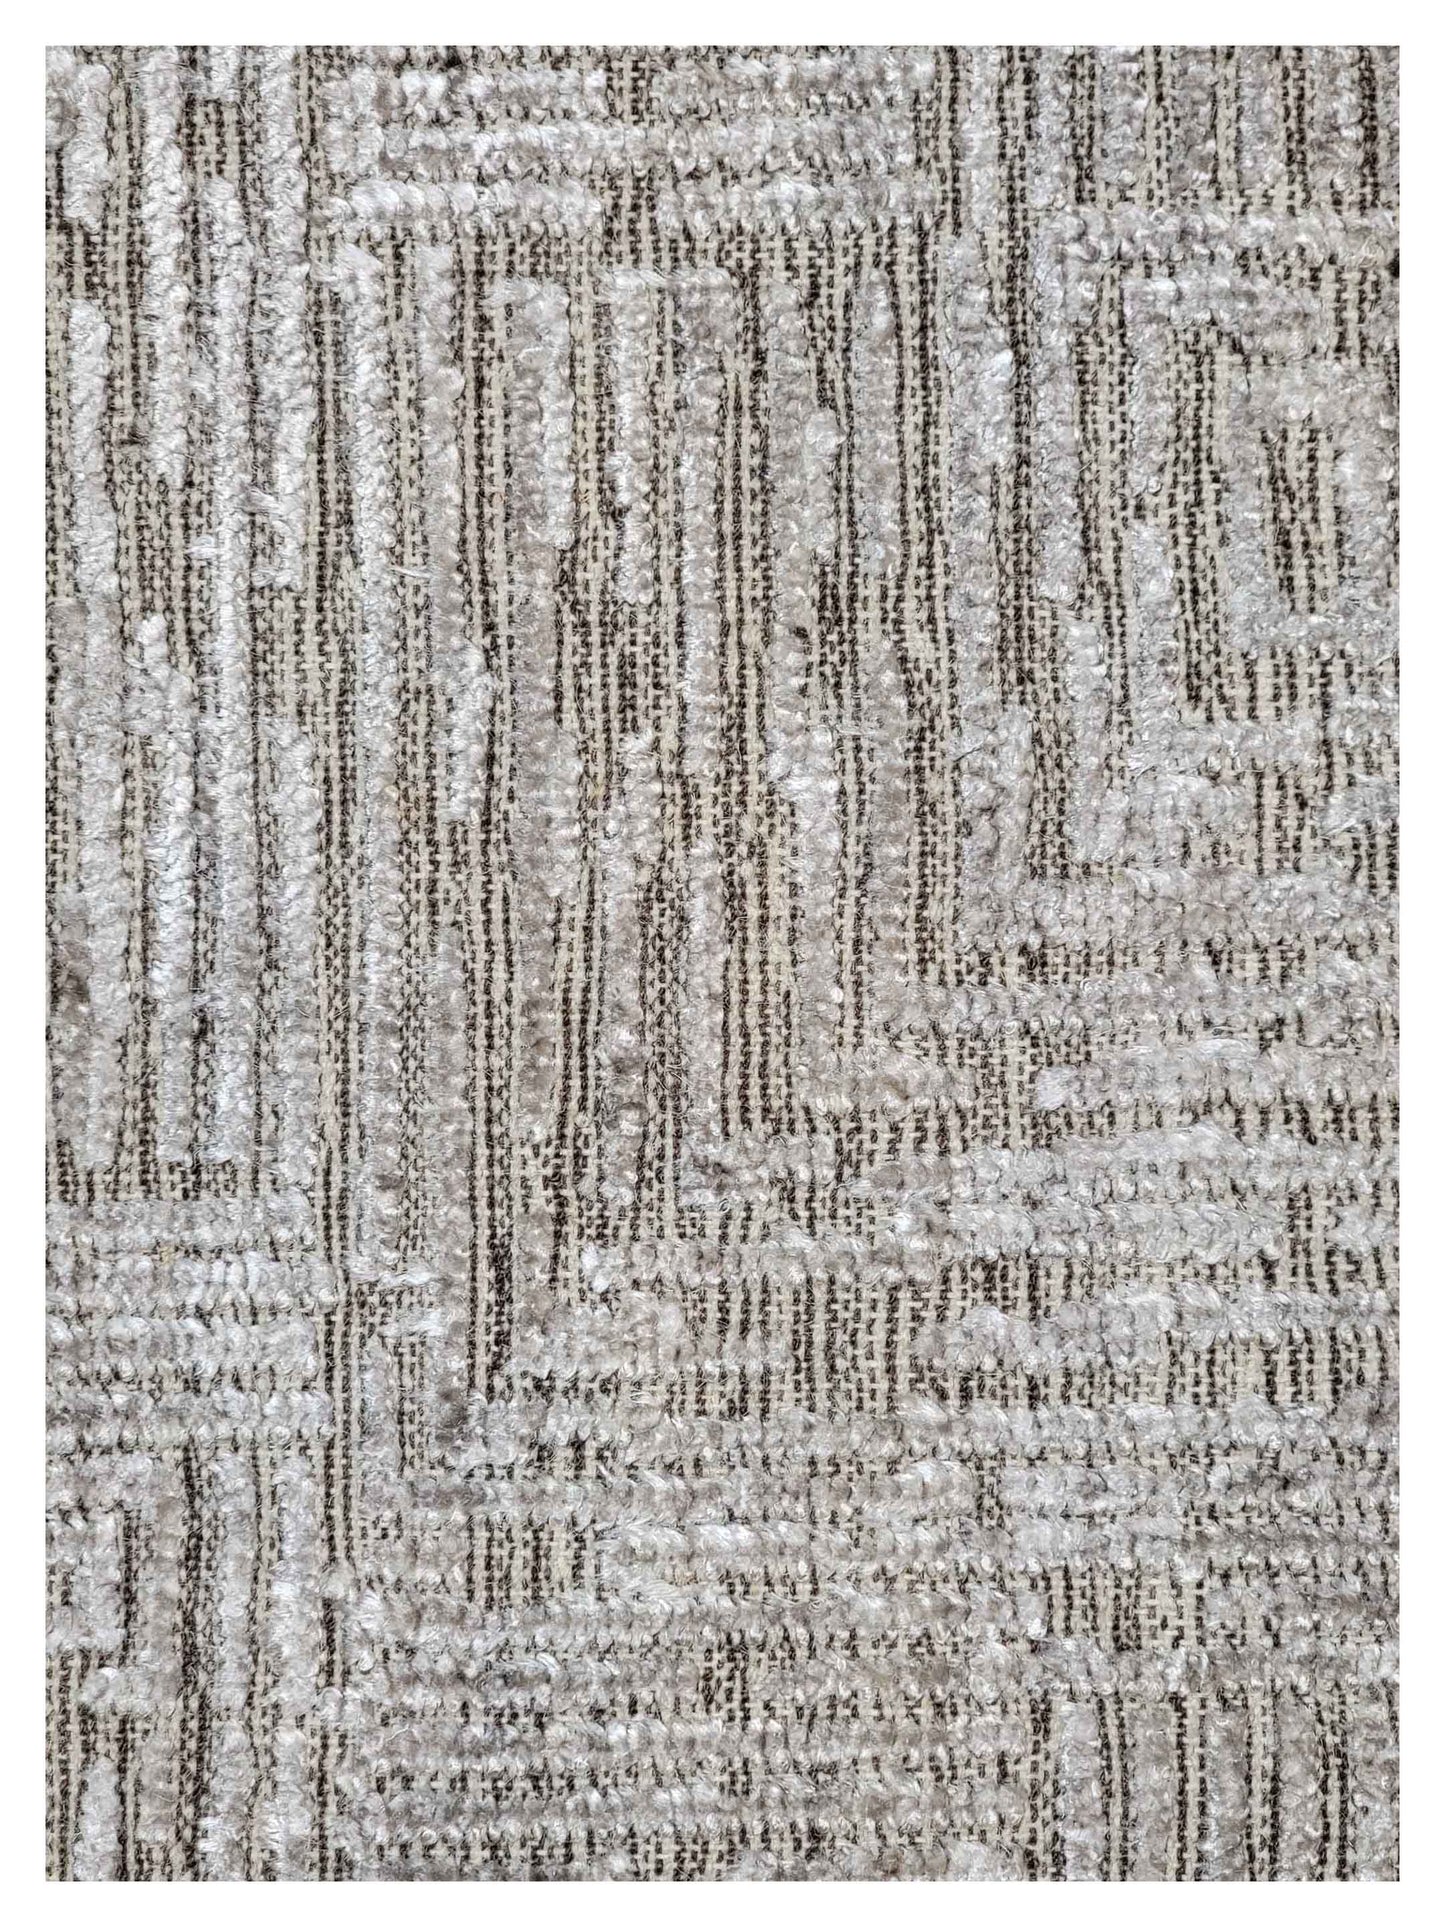 Limited Quantum QN-353 SMOKE  Transitional Knotted Rug